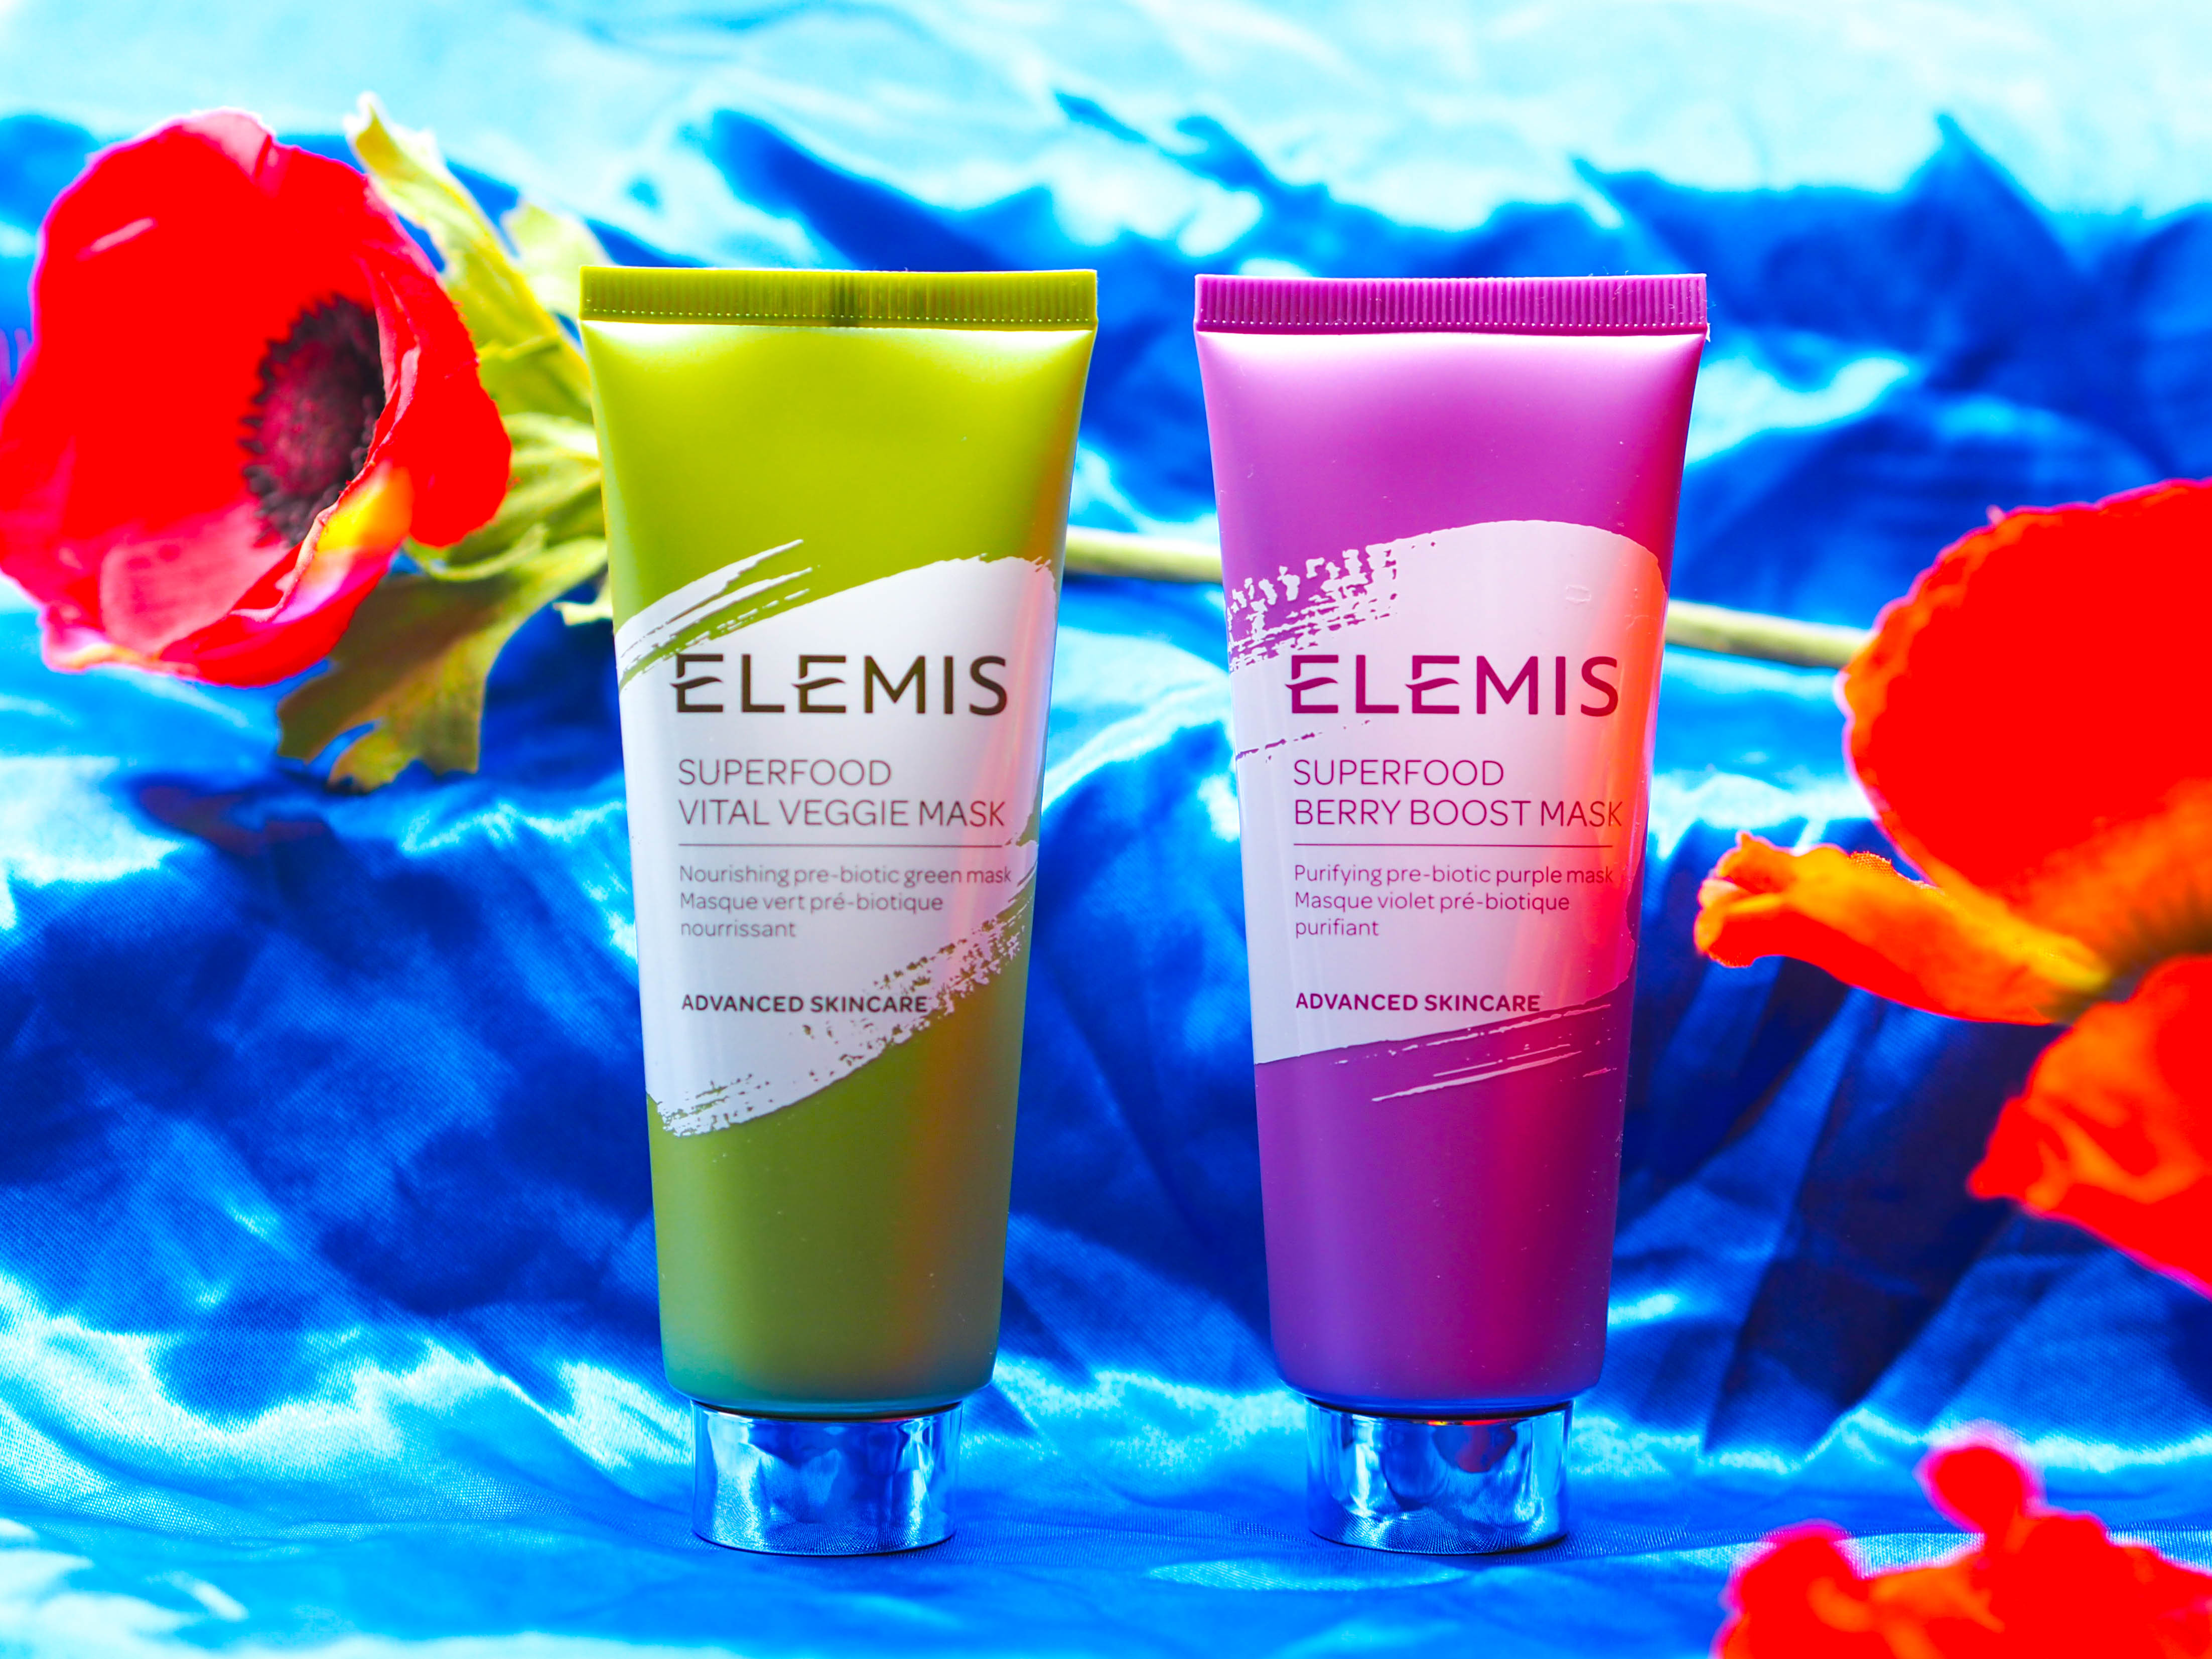 Elemis Superfood Berry Boost and Vital Veggie Mask Reviews